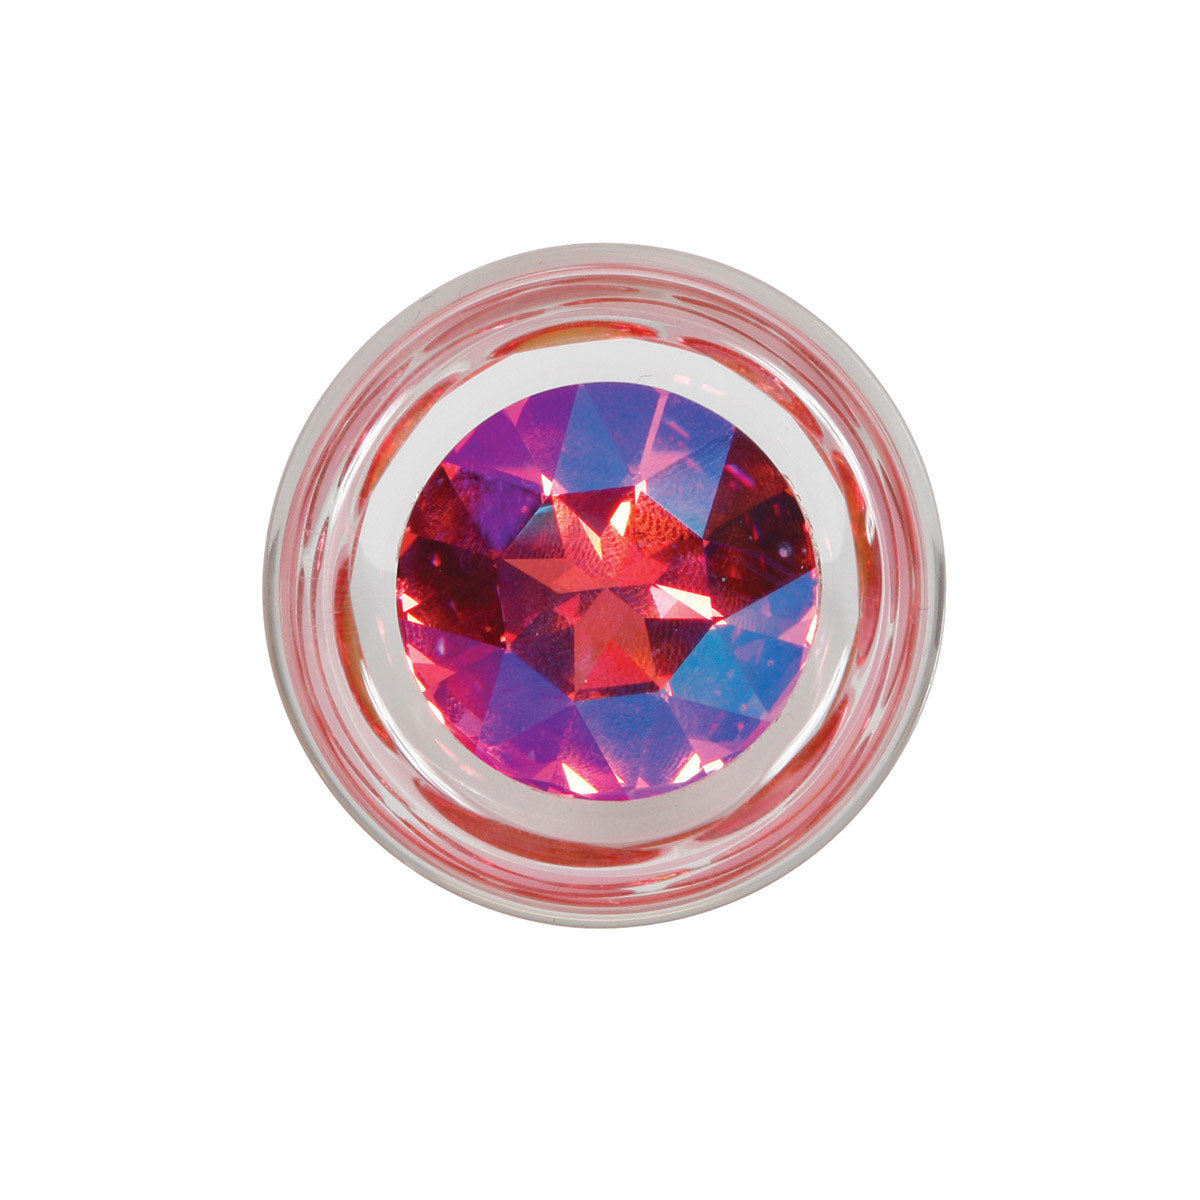 Crystal Delights Pineapple Delight Plug w/ Pink Crystal